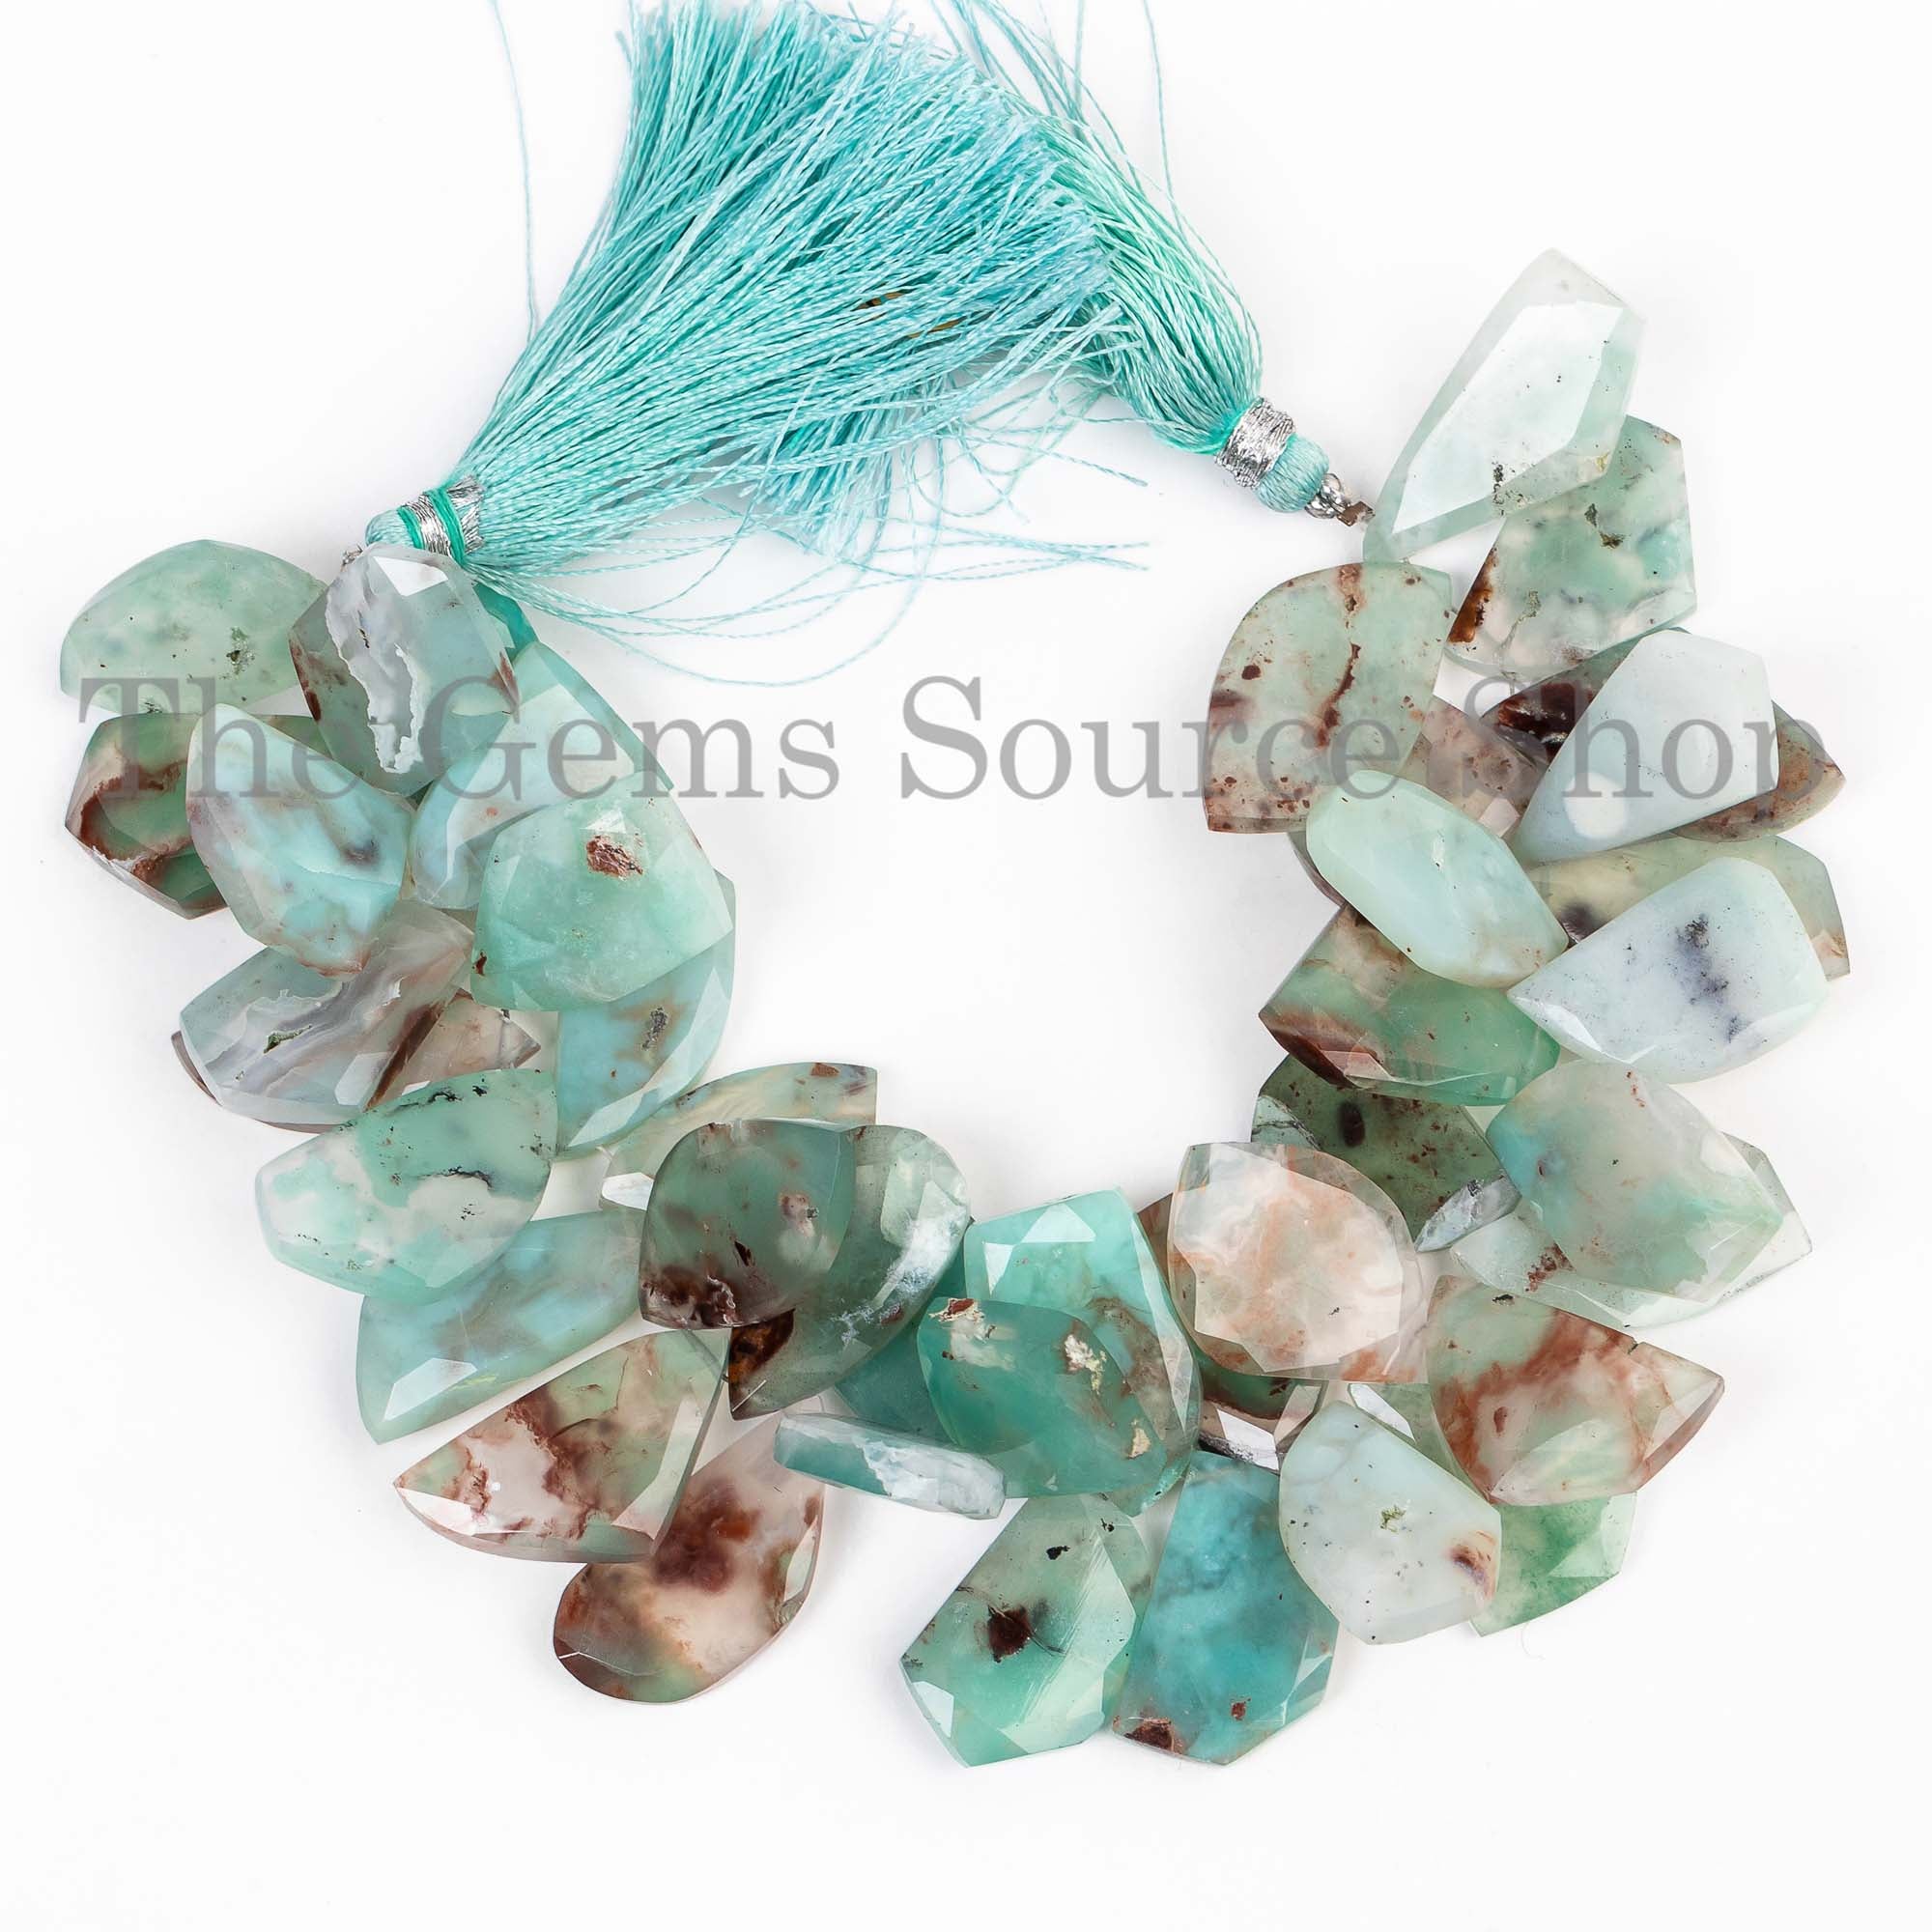 Aqua Chalcedony Faceted Beads, Faceted Flat Nuggets, Chalcedony Nugget Beads, Wholesale Beads